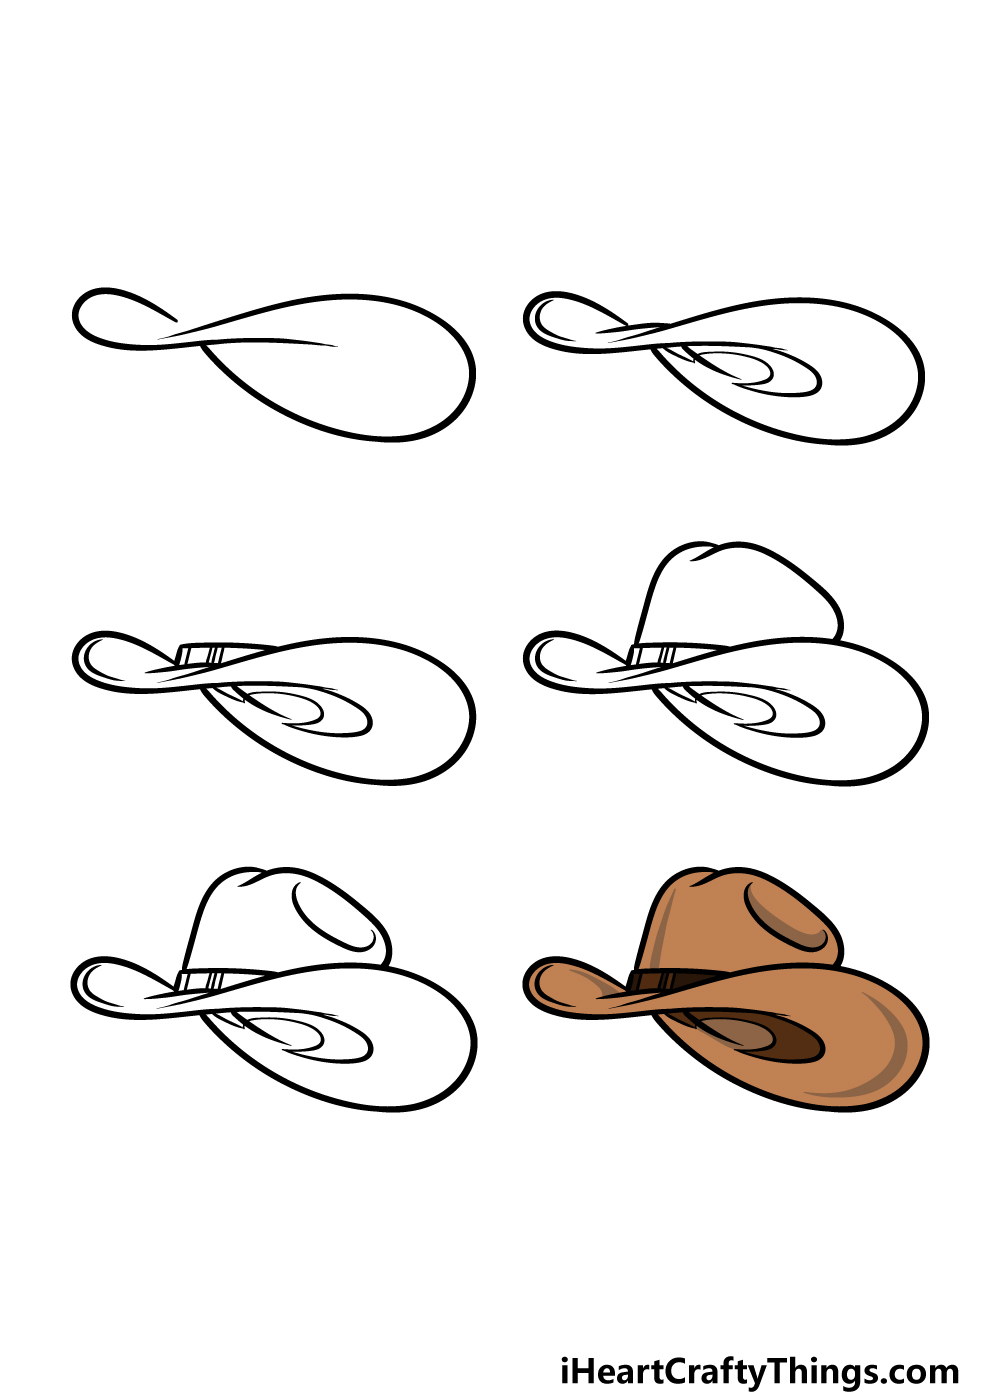 how to draw a cartoon cowboy hat in 6 steps